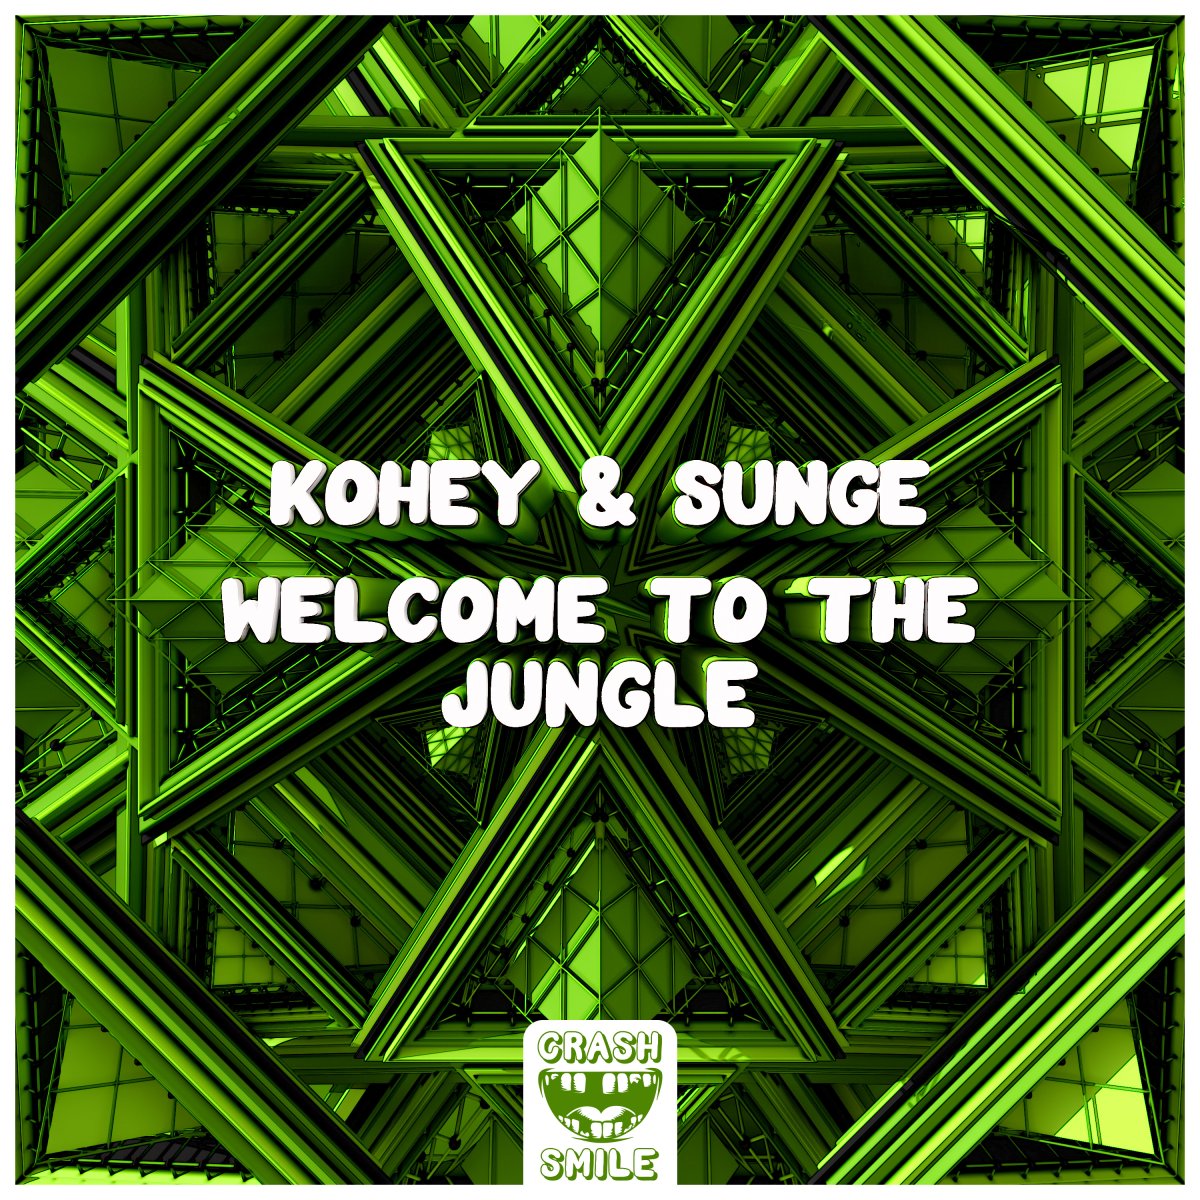 Welcome To The Jungle - Kohey⁠ & Sunge⁠ 